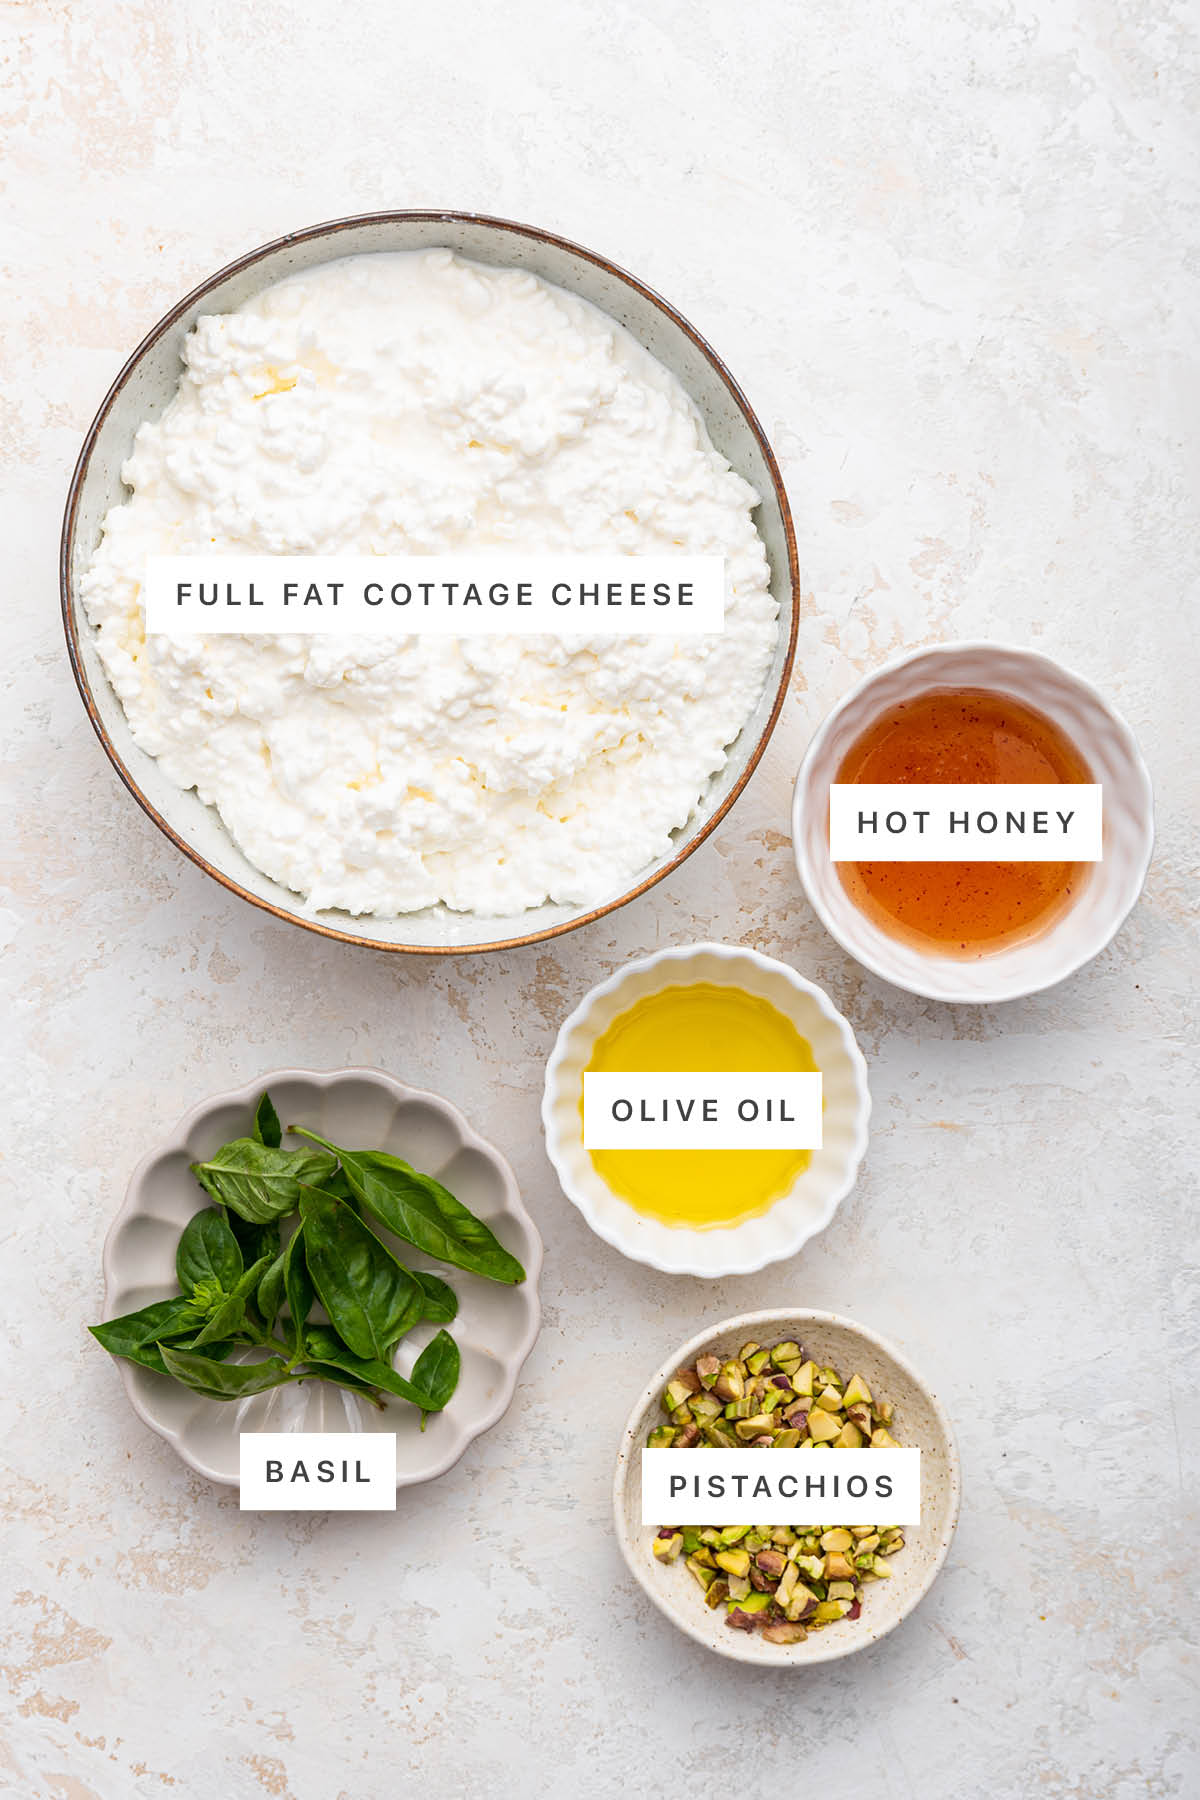 Ingredients measured out to make Hot Honey Whipped Cottage Cheese: cottage cheese, hot honey, olive oil, basil and pistachios.